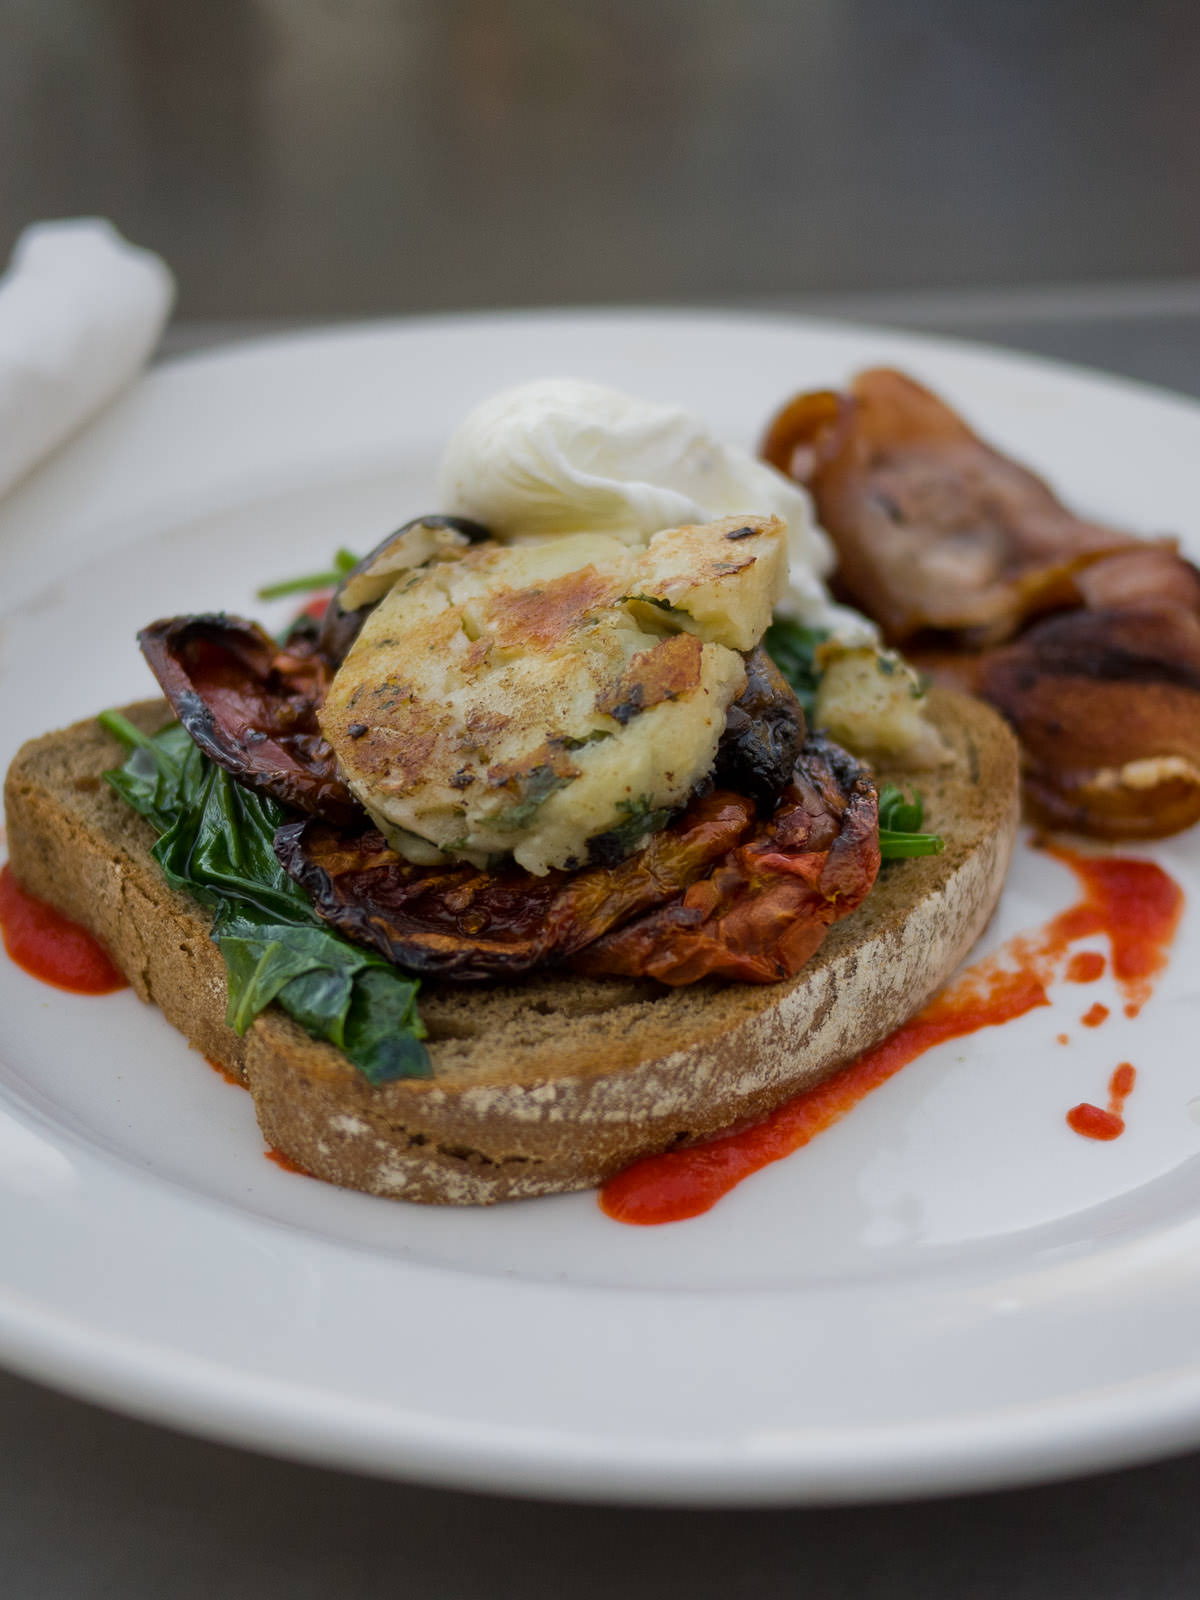 Vegetarian - toast, hash brown, mushroom, spinach, roast tomato and poached egg (AU$16) with a side of bacon (AU$4)